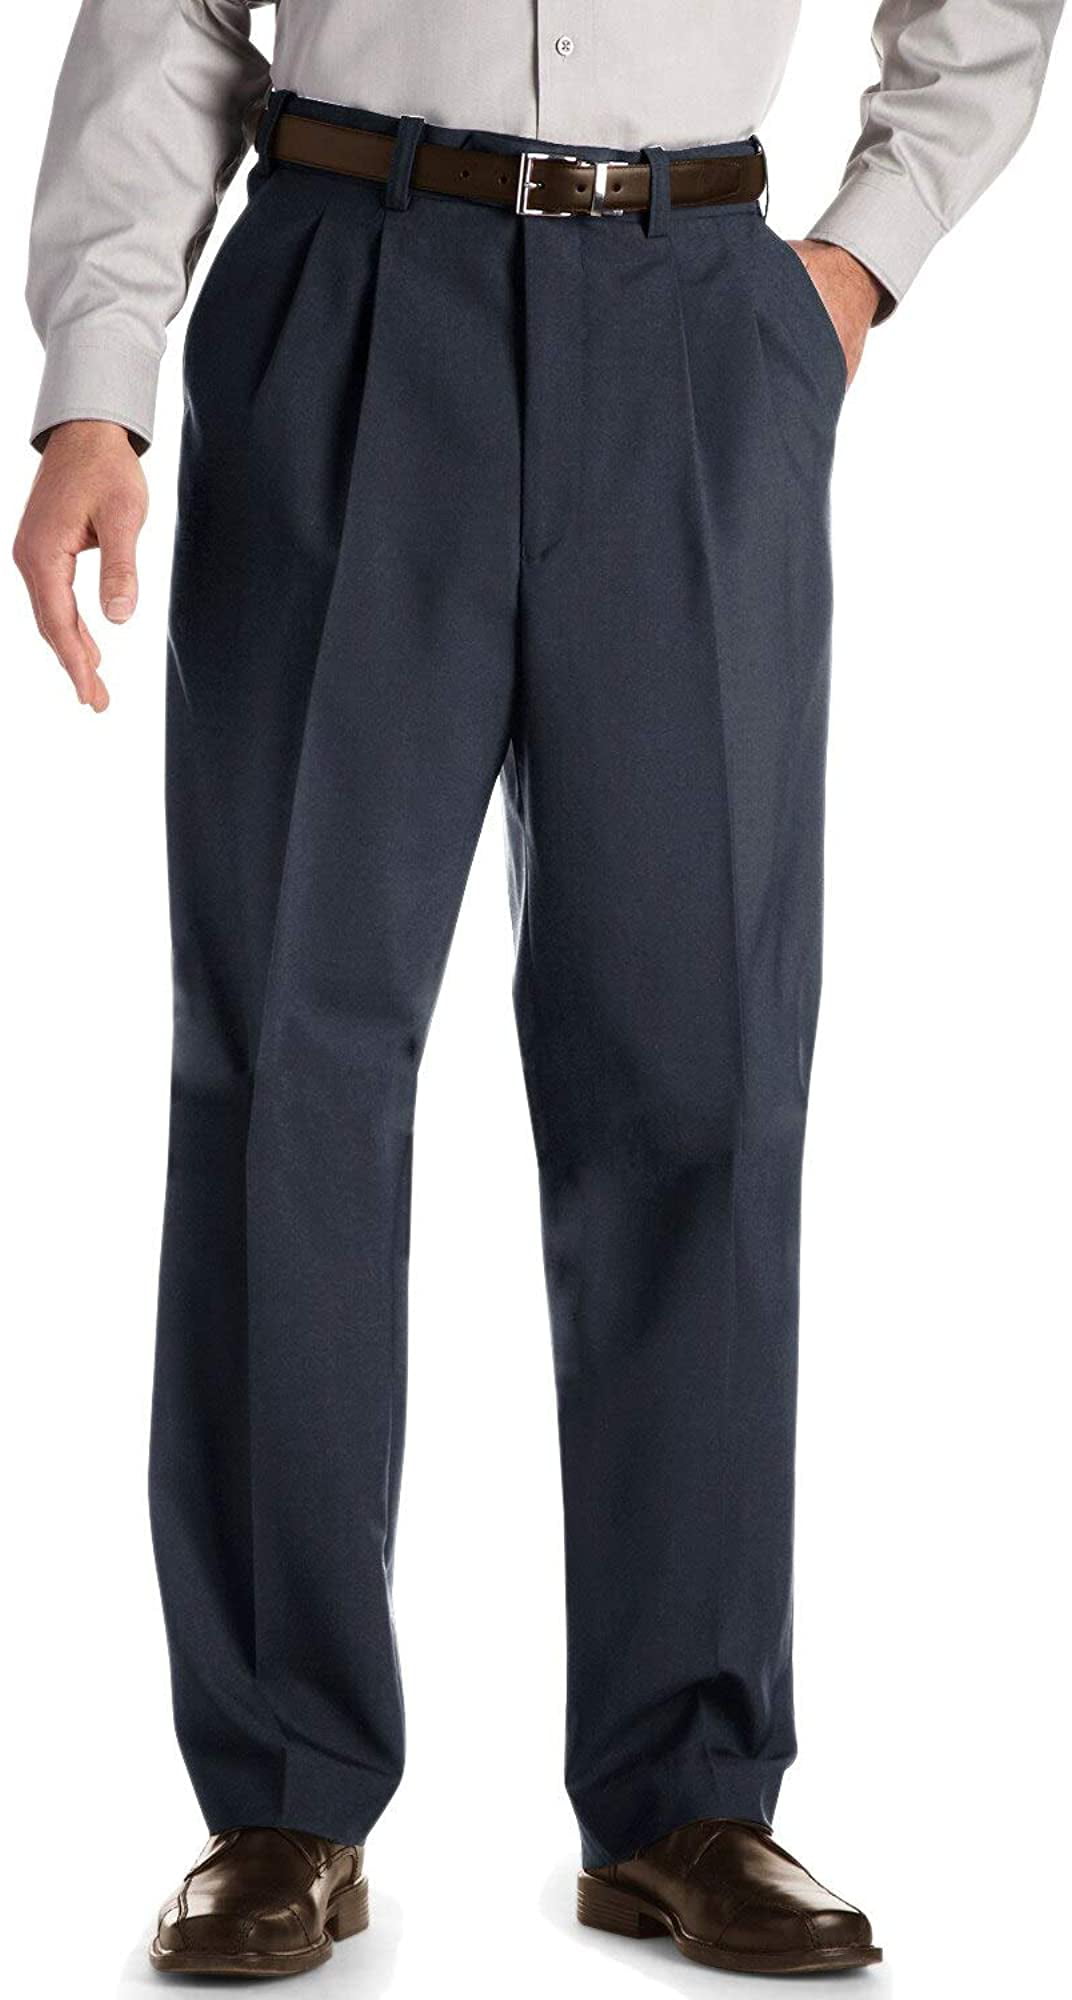 Gold Series by DXL Big and Tall Waist-Relaxer Hemmed Pleated Suit Pants Charcoal 